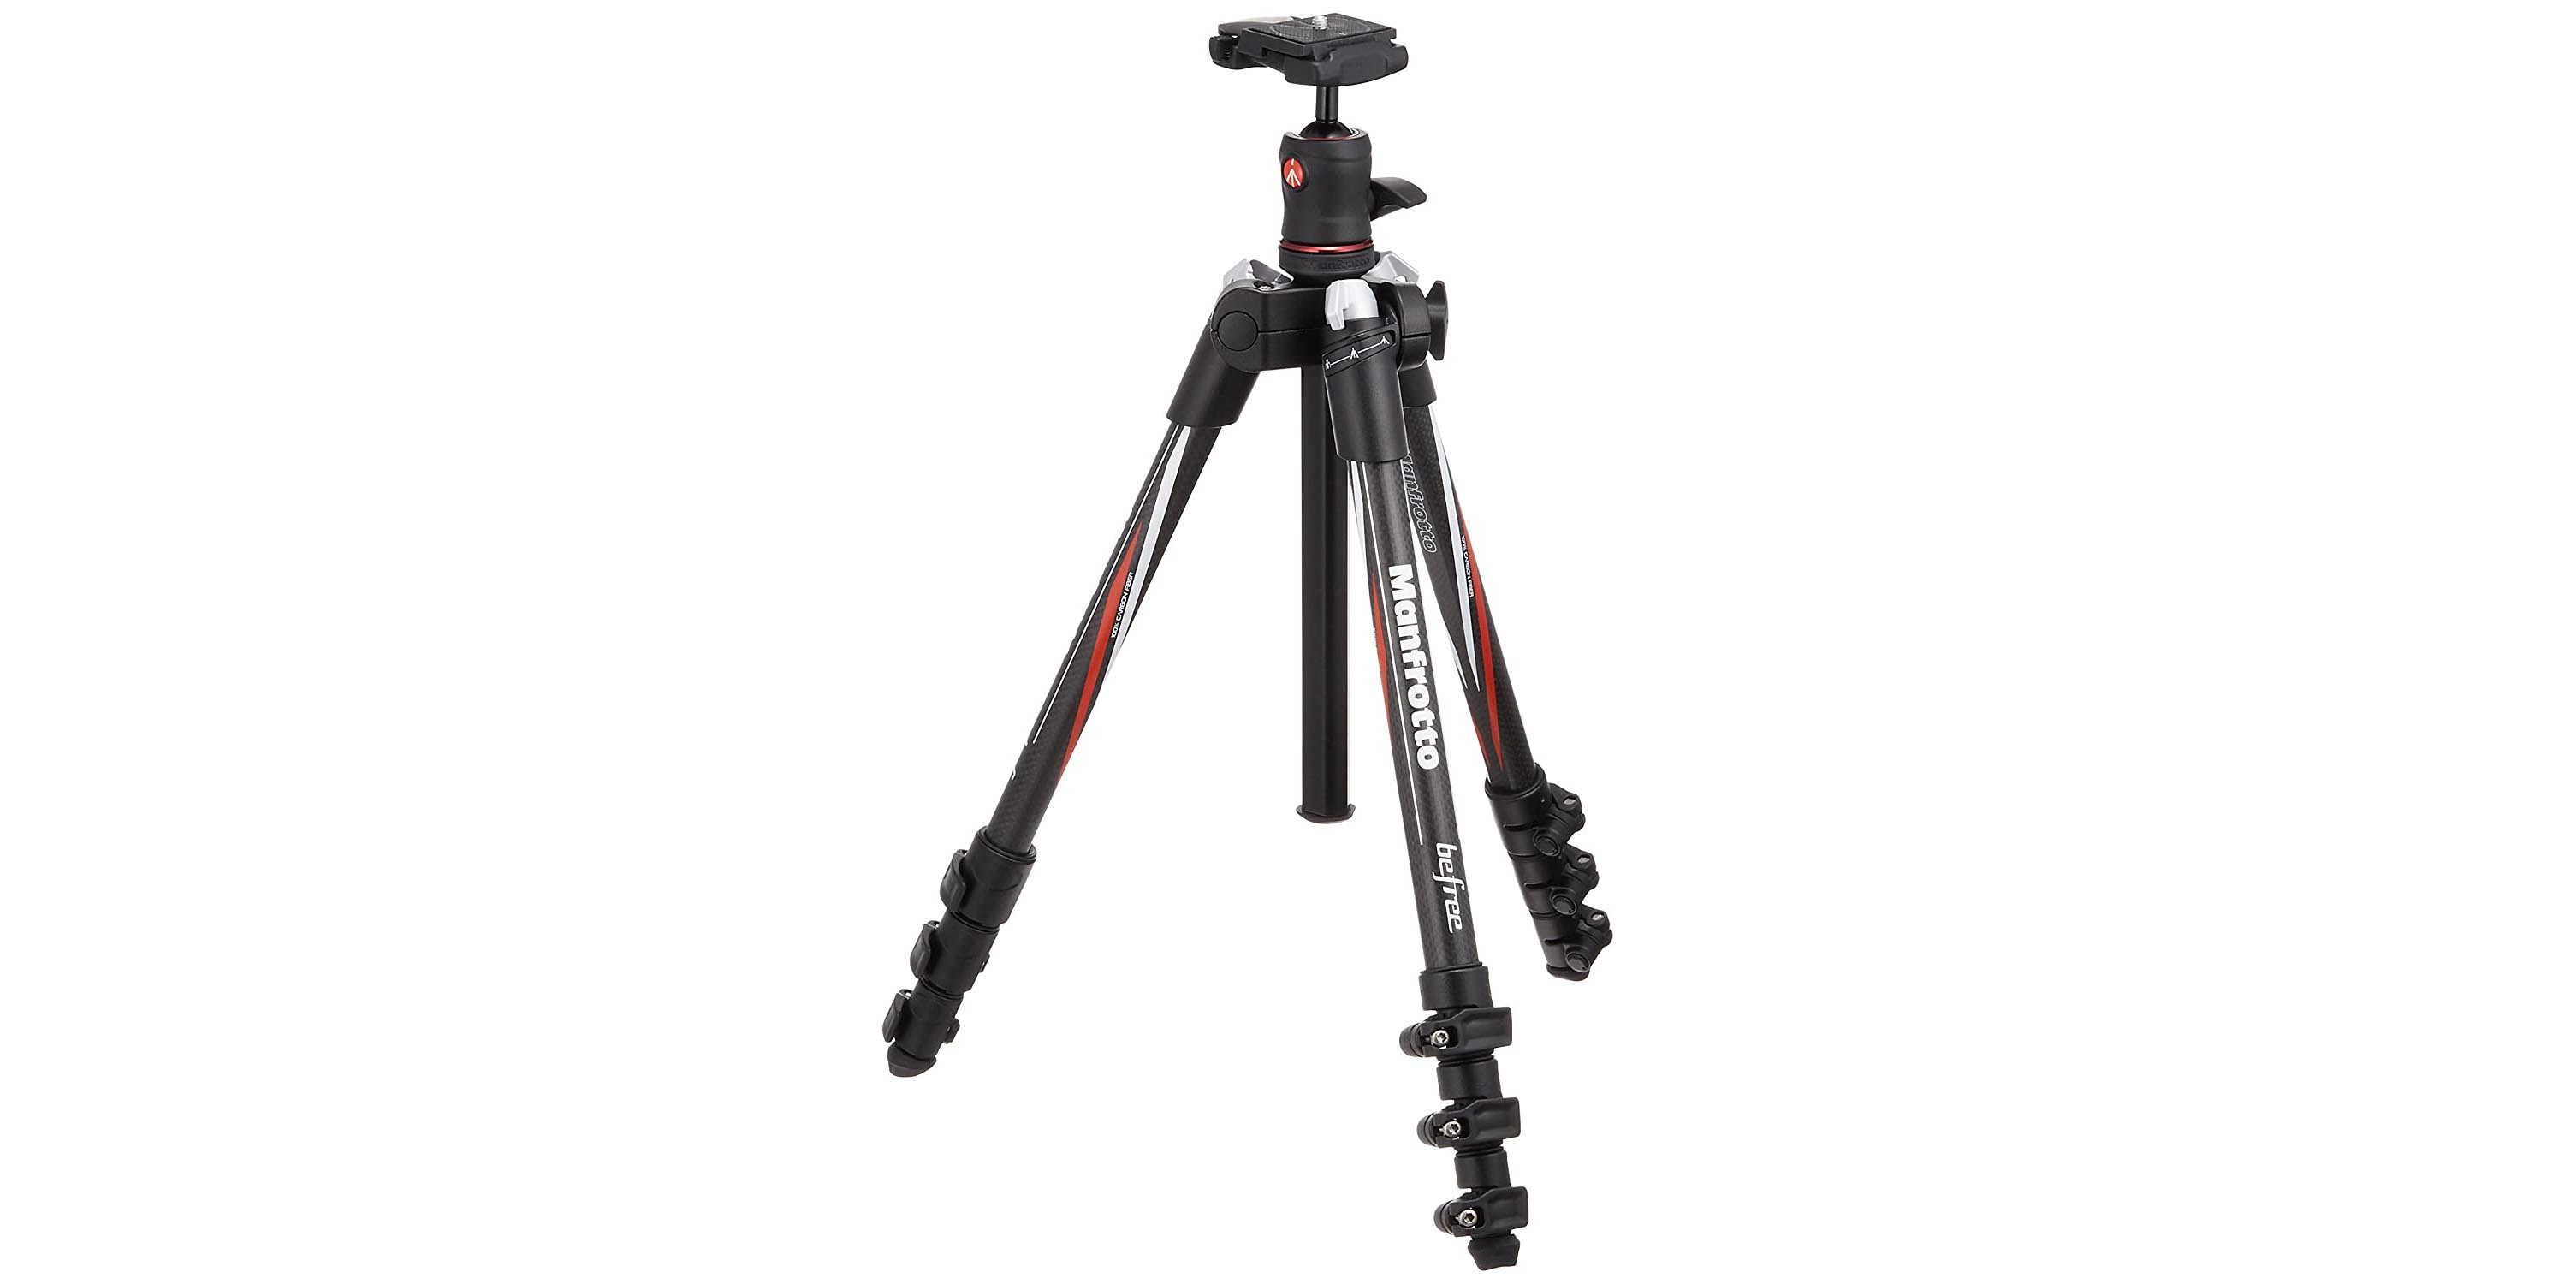 Manfrotto MKBFRC4-BH Befree Carbon Fiber Tripod with Ball Head